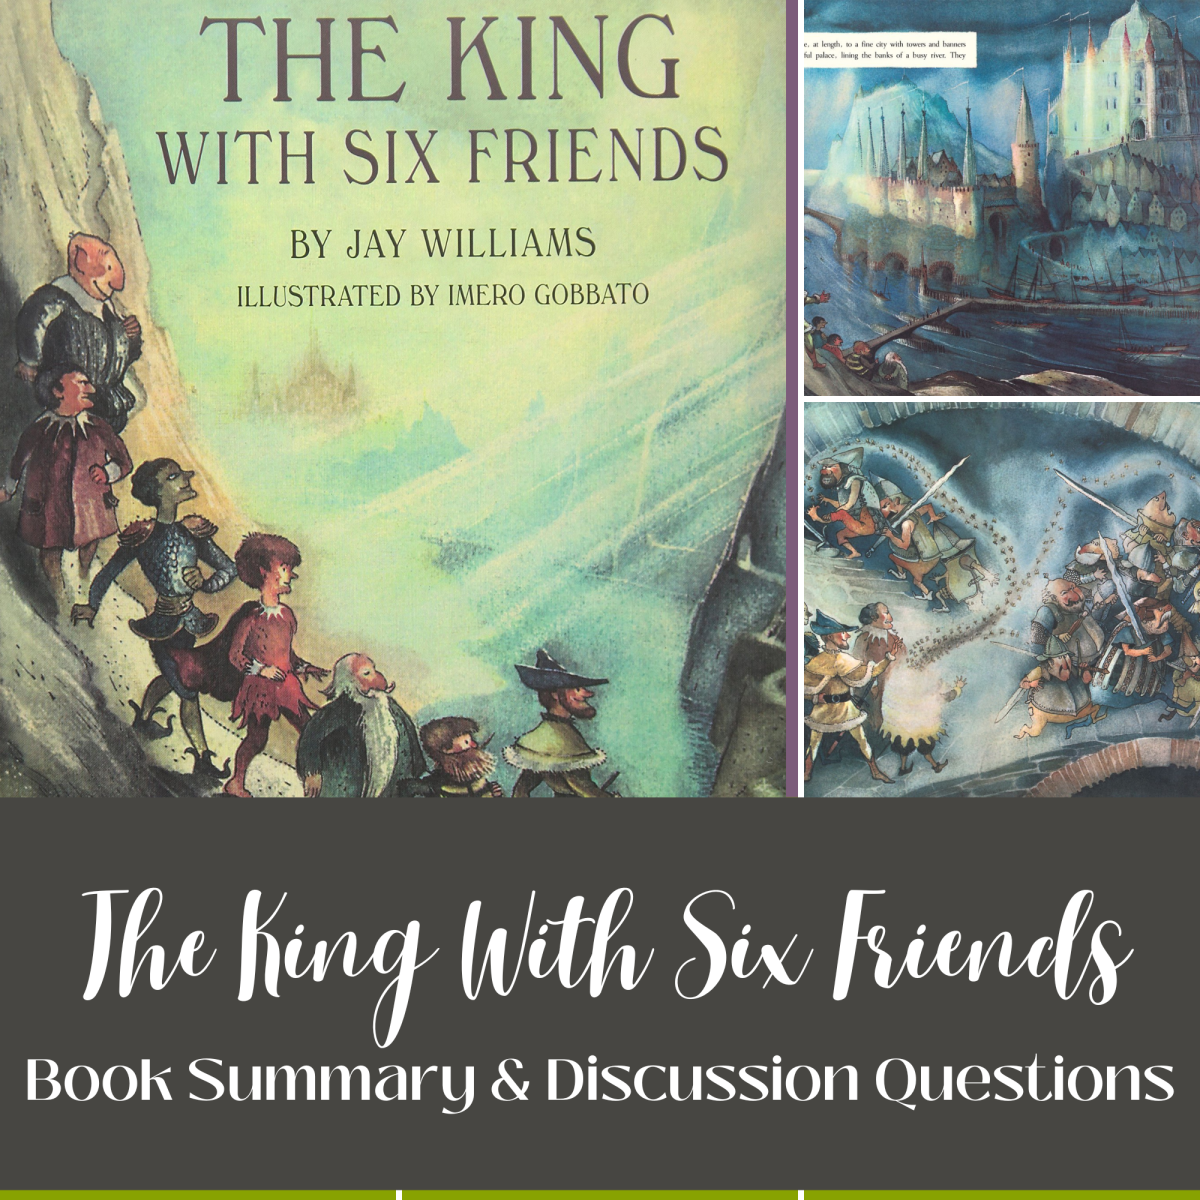 Vintage Modern Children's Books: The King With Six Friends by Jay Williams